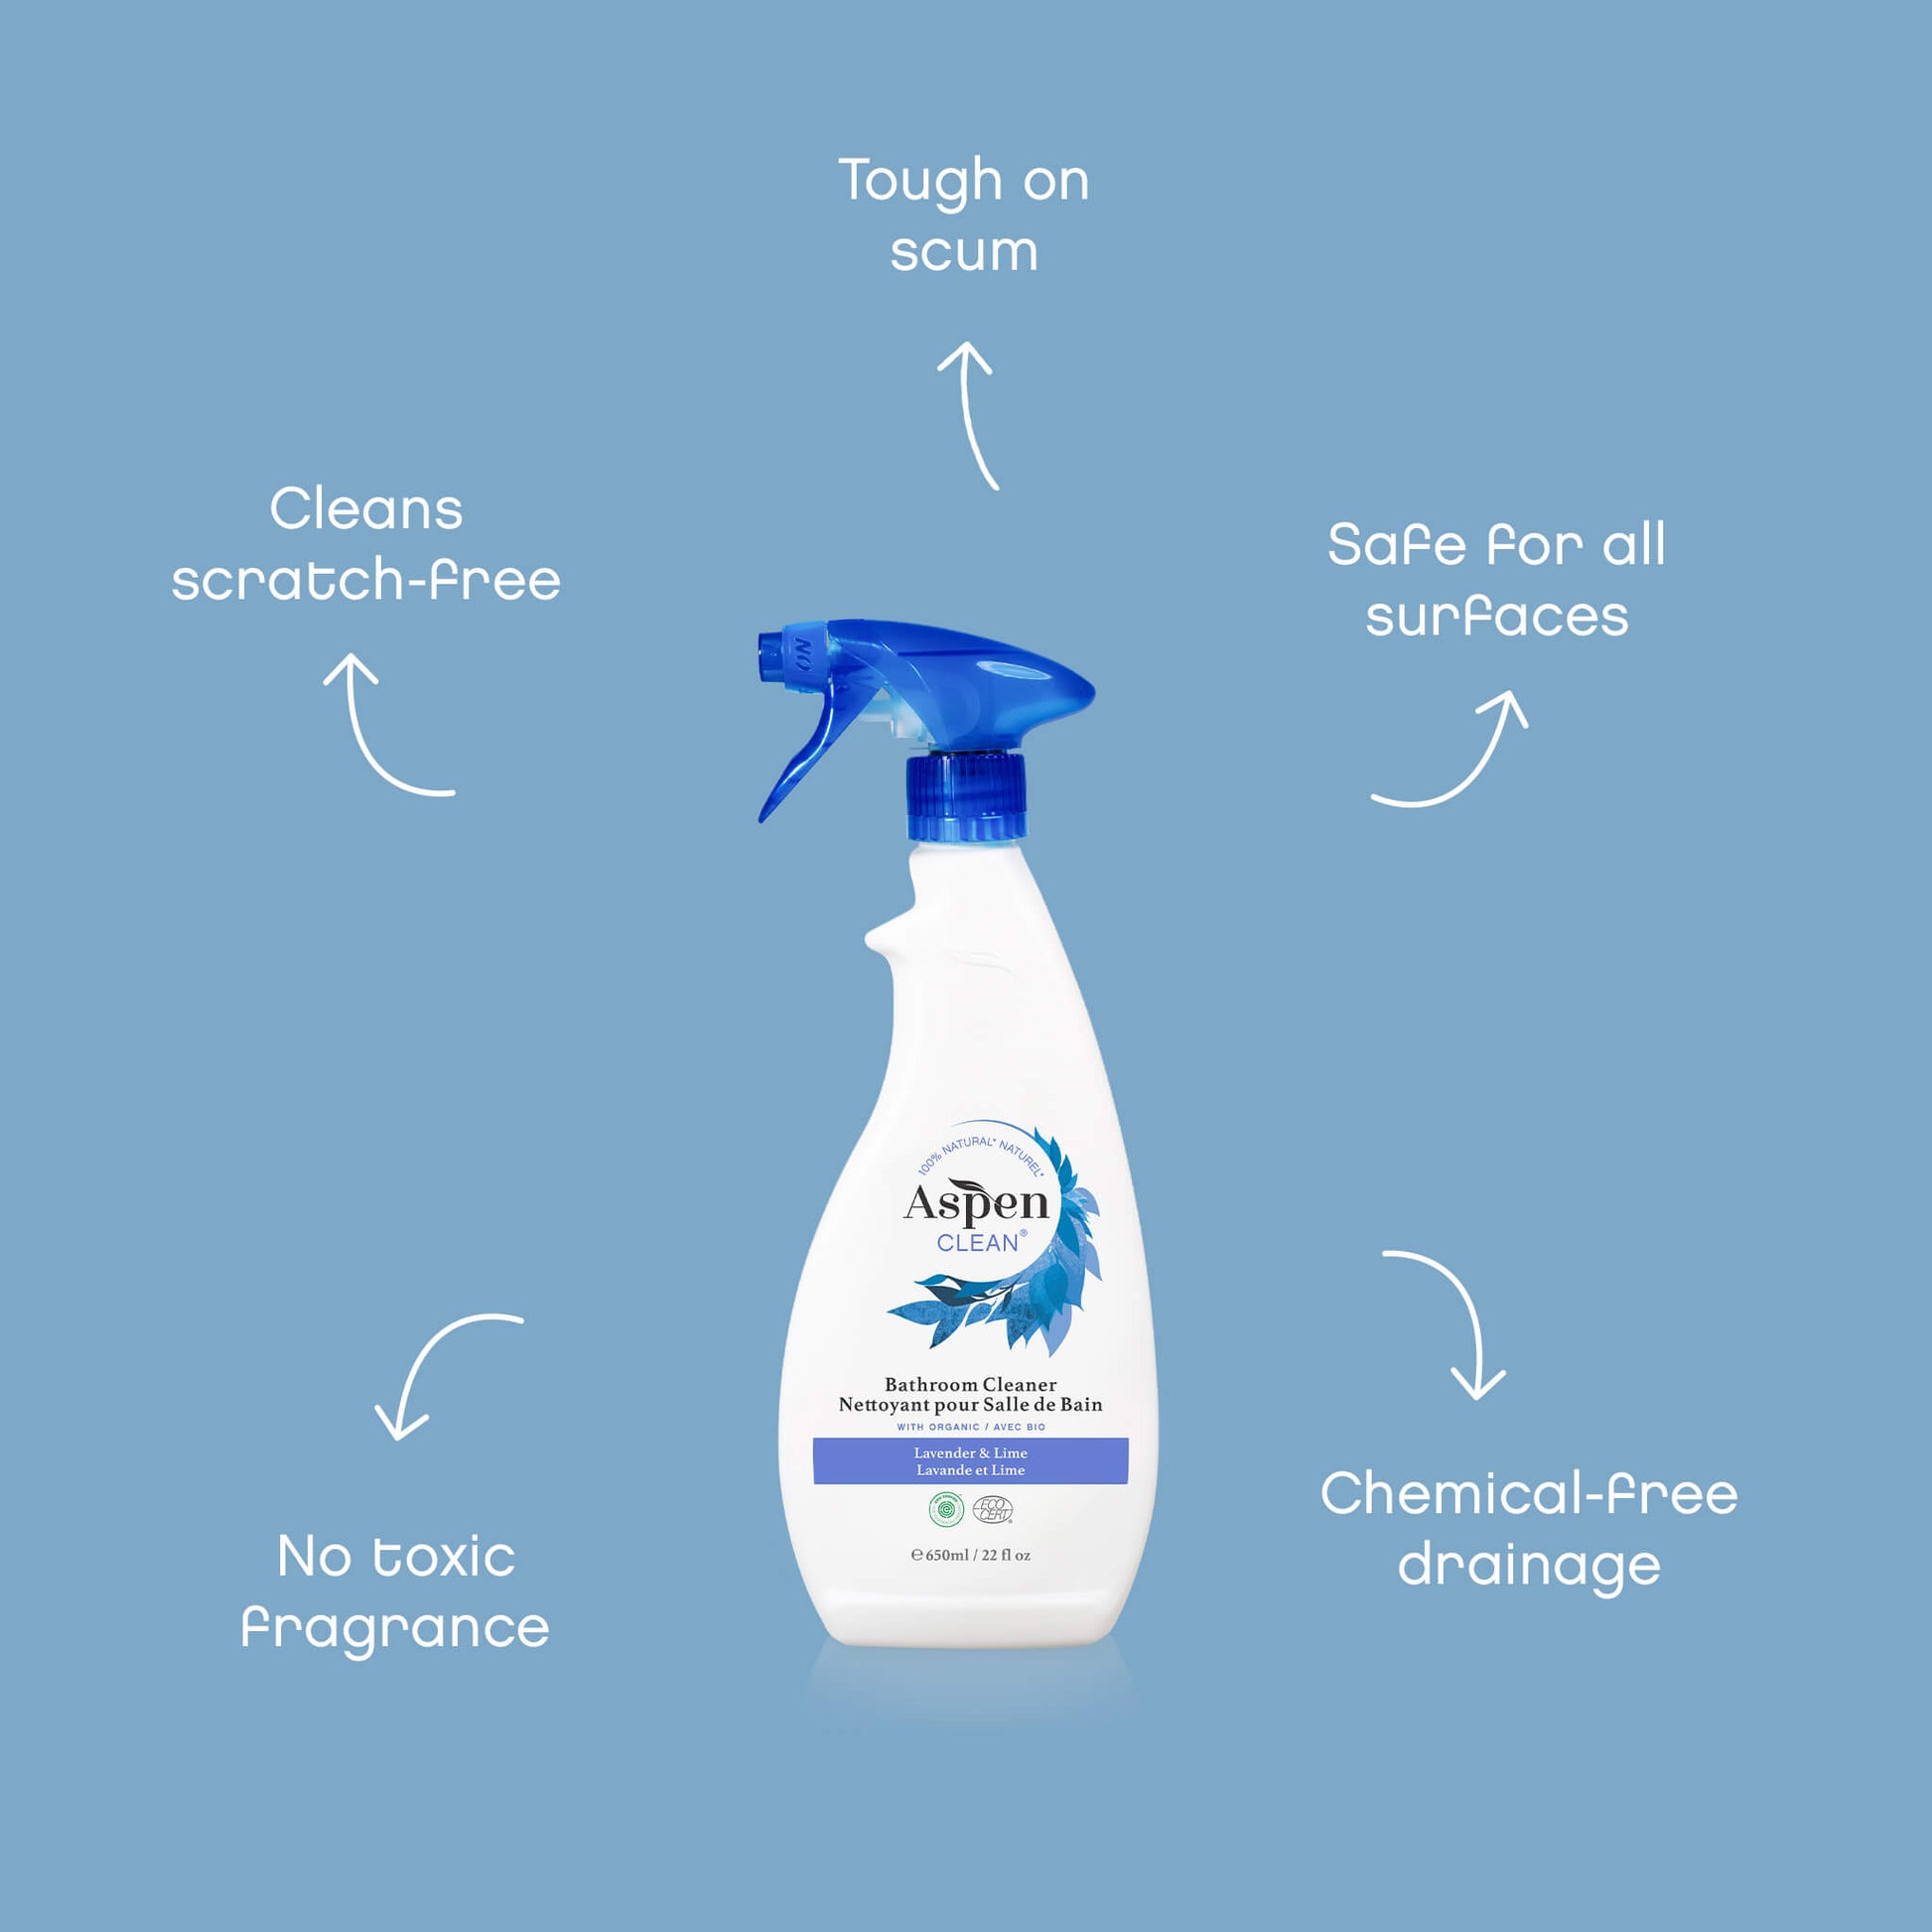 AspenClean Bathroom Cleaner is Tough on scum and safe for all surfaces